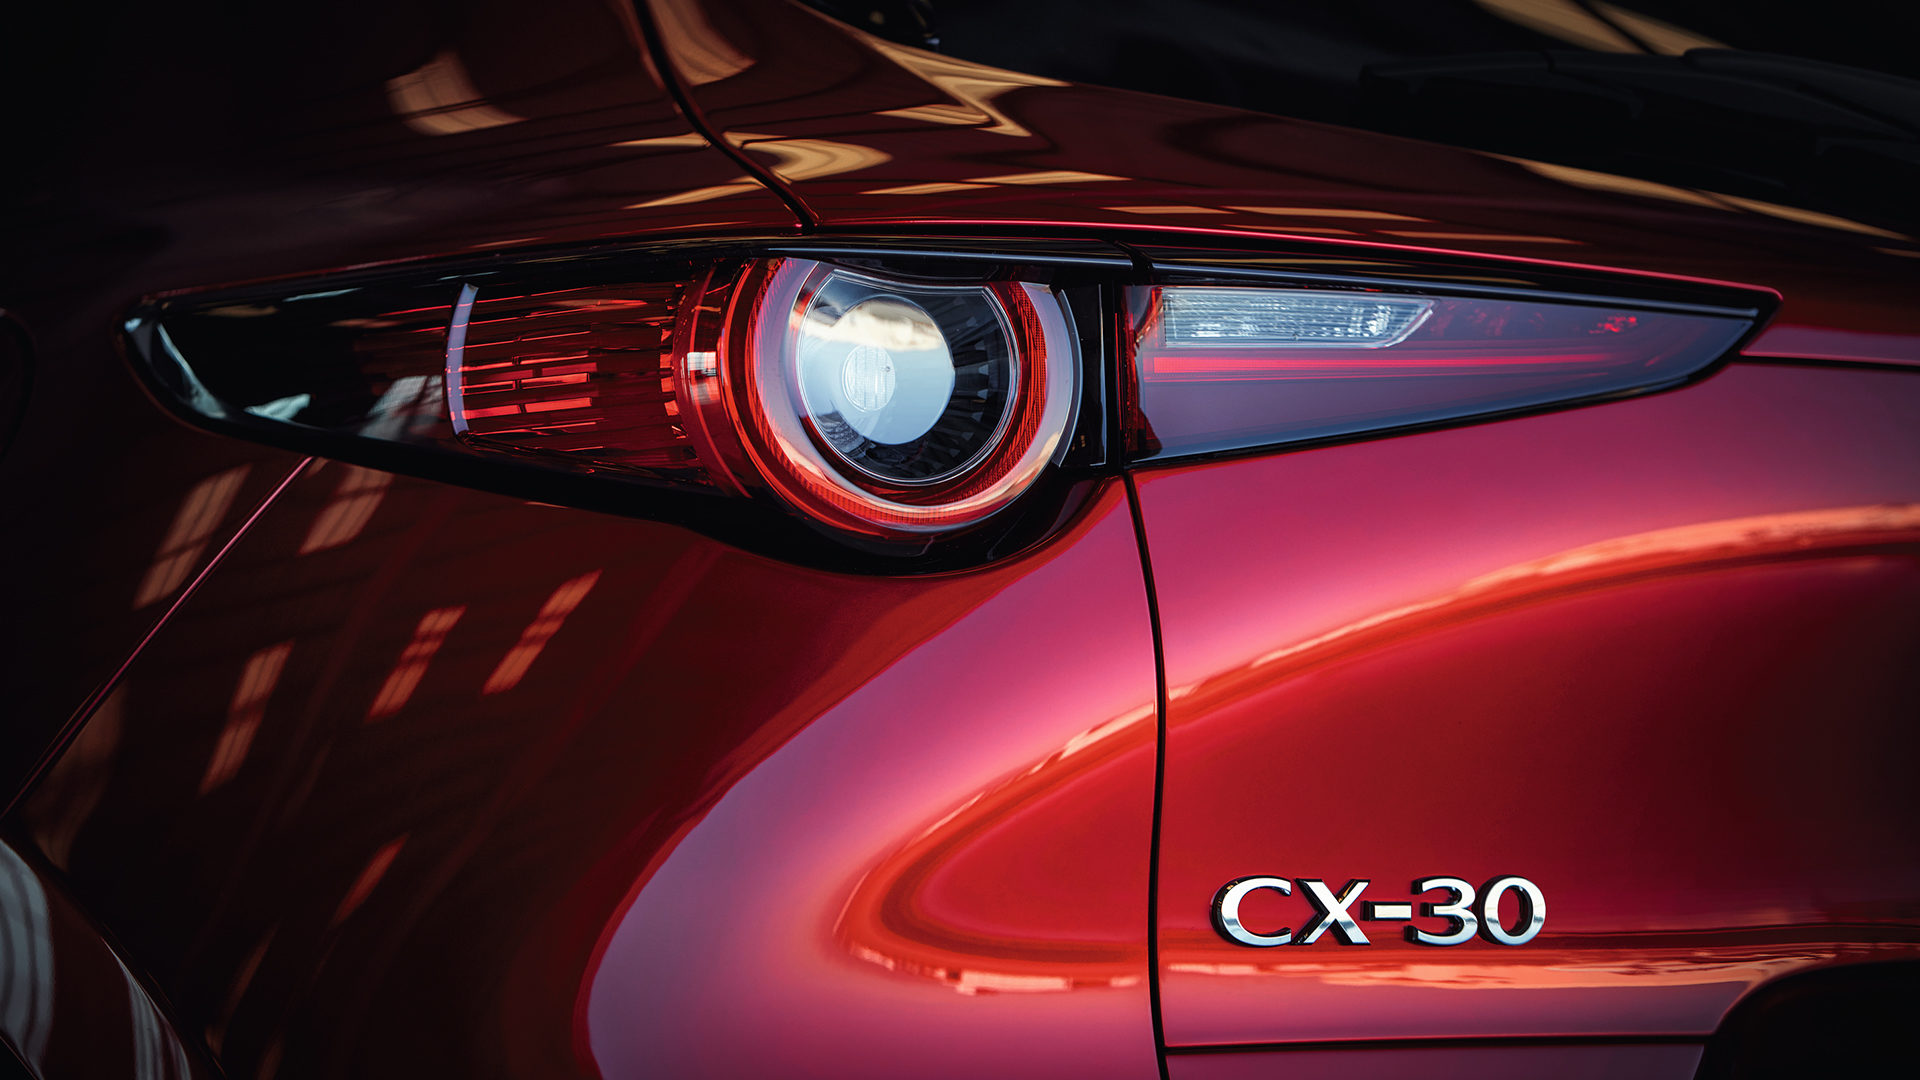 2019 CX 30 Magazine Issue34 CX 30 Reveal 3 Png 1920X1080[1]